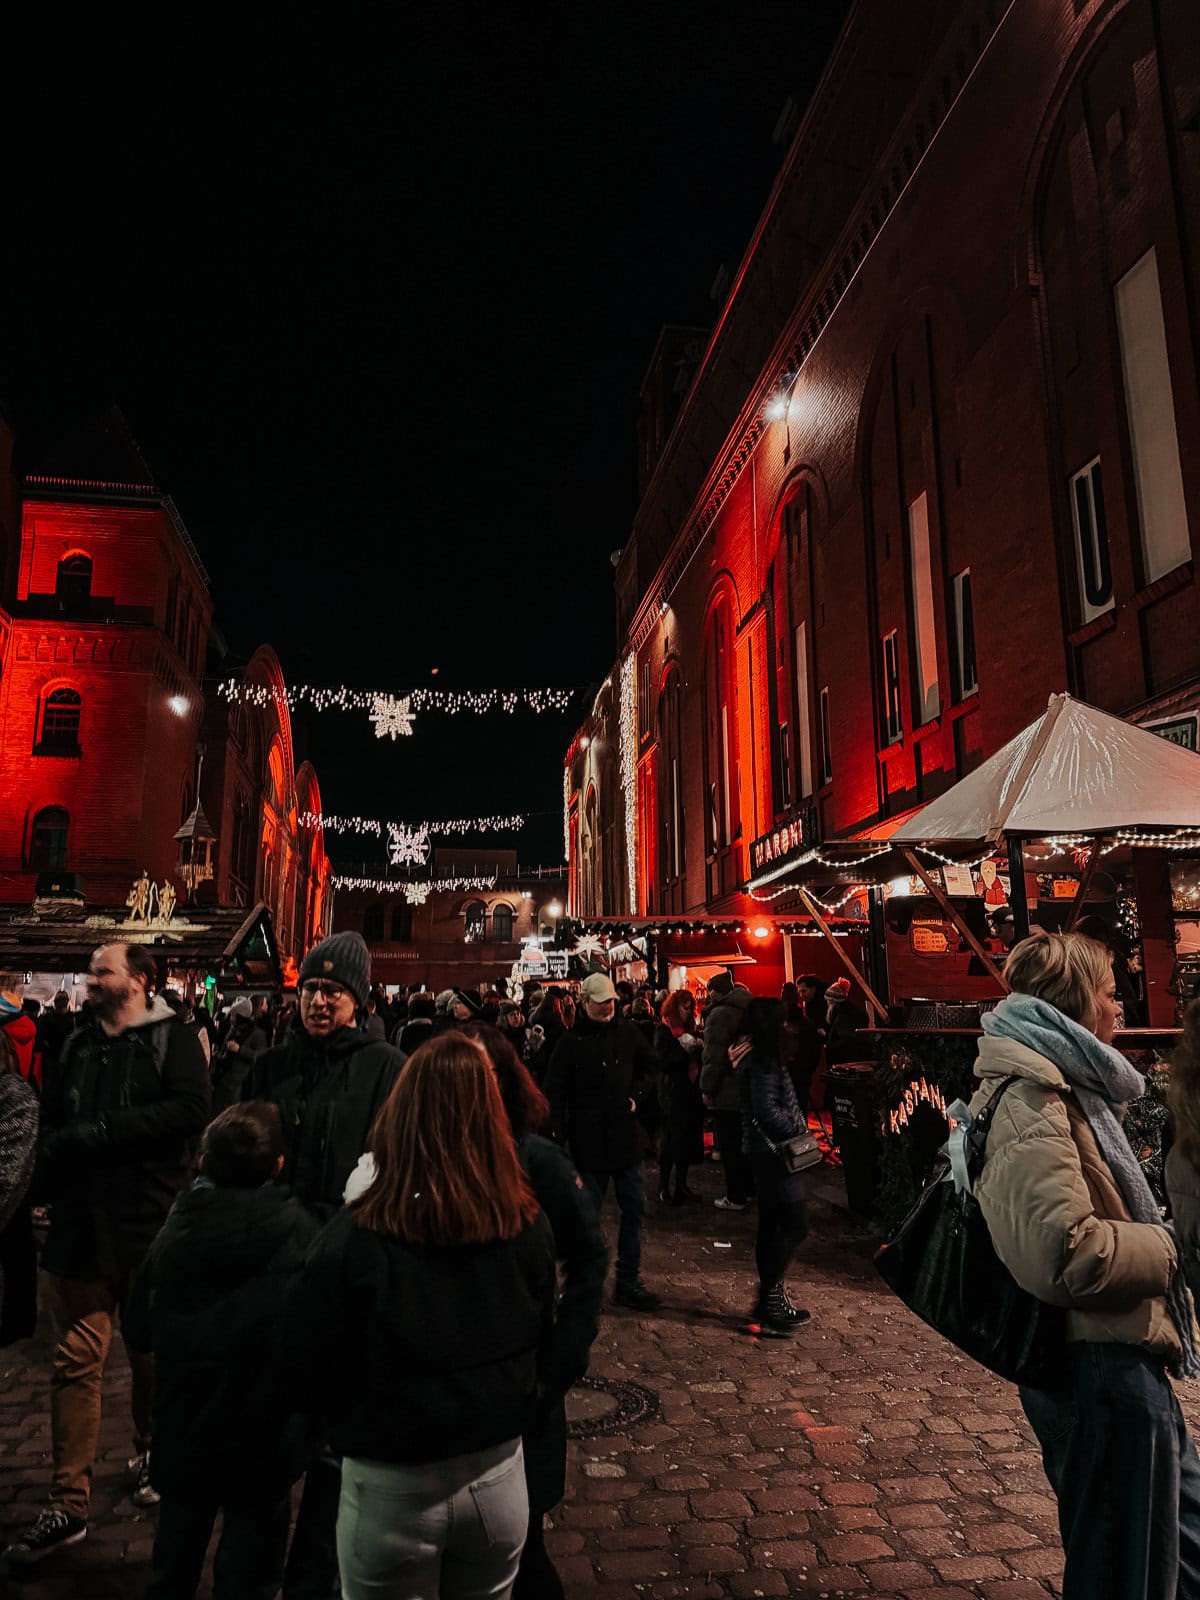 A vibrant evening scene at a holiday market, with bustling crowds of people in winter clothing. The scene is illuminated by festive lights strung above and the warm glow of market stalls against a historic red brick building